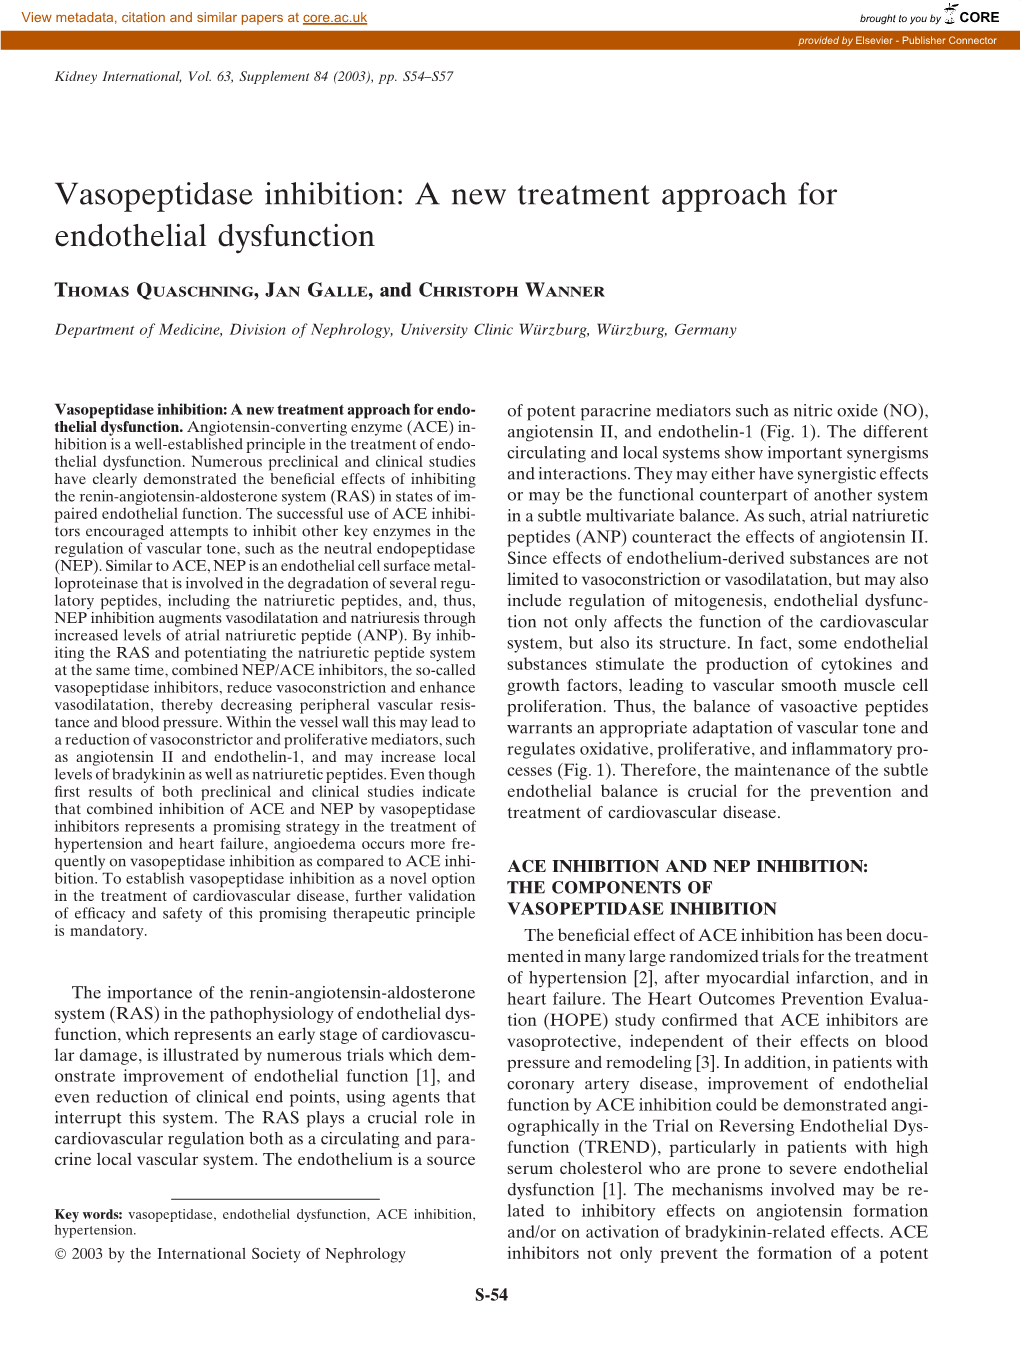 Vasopeptidase Inhibition: a New Treatment Approach for Endothelial Dysfunction